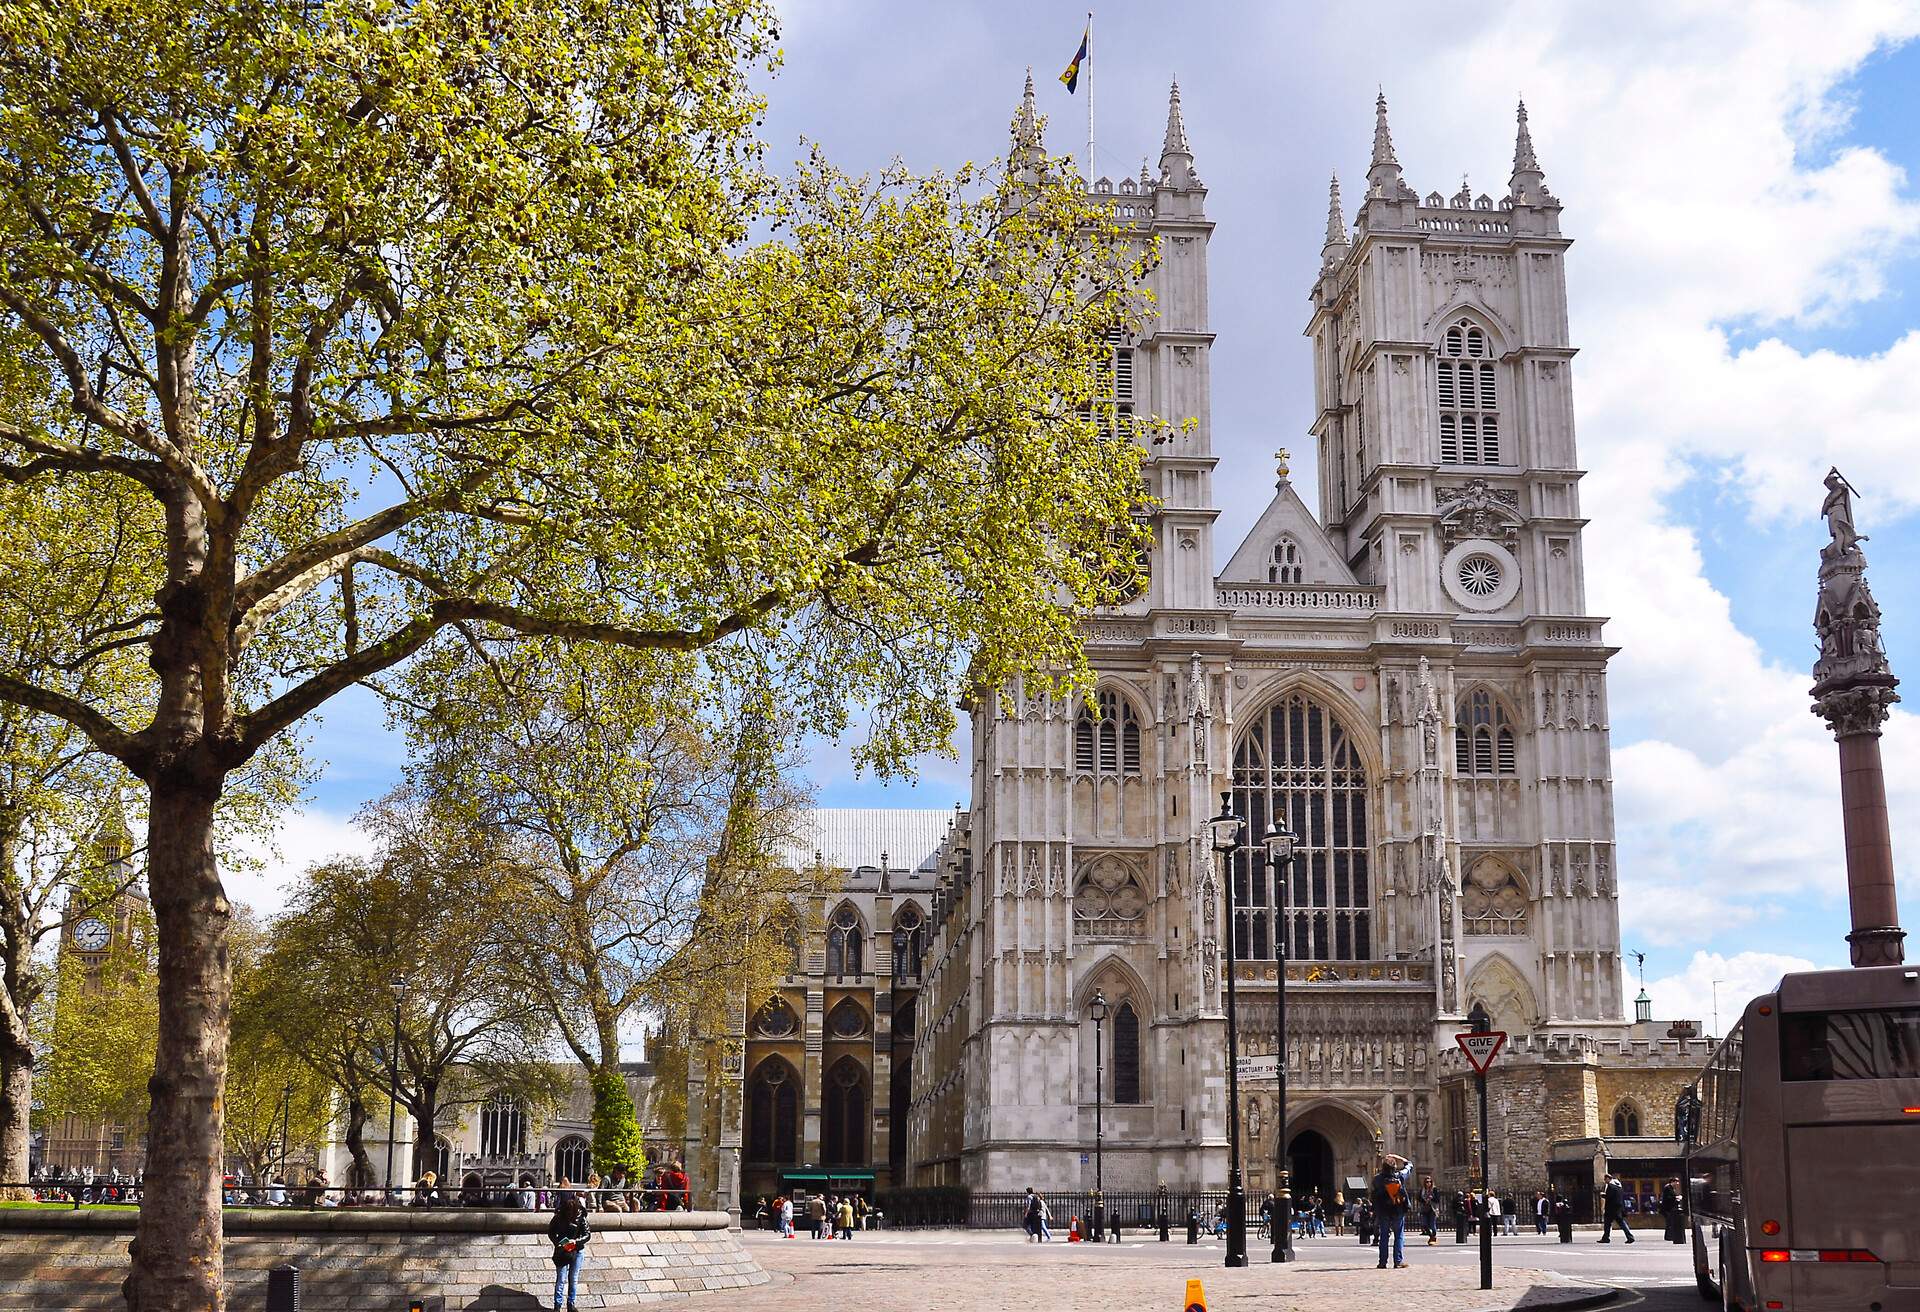 Westminster Abbey is a gothic church with an enormous nave window and twin towers with pinnacles in front of a crowded open space with autumnal trees.